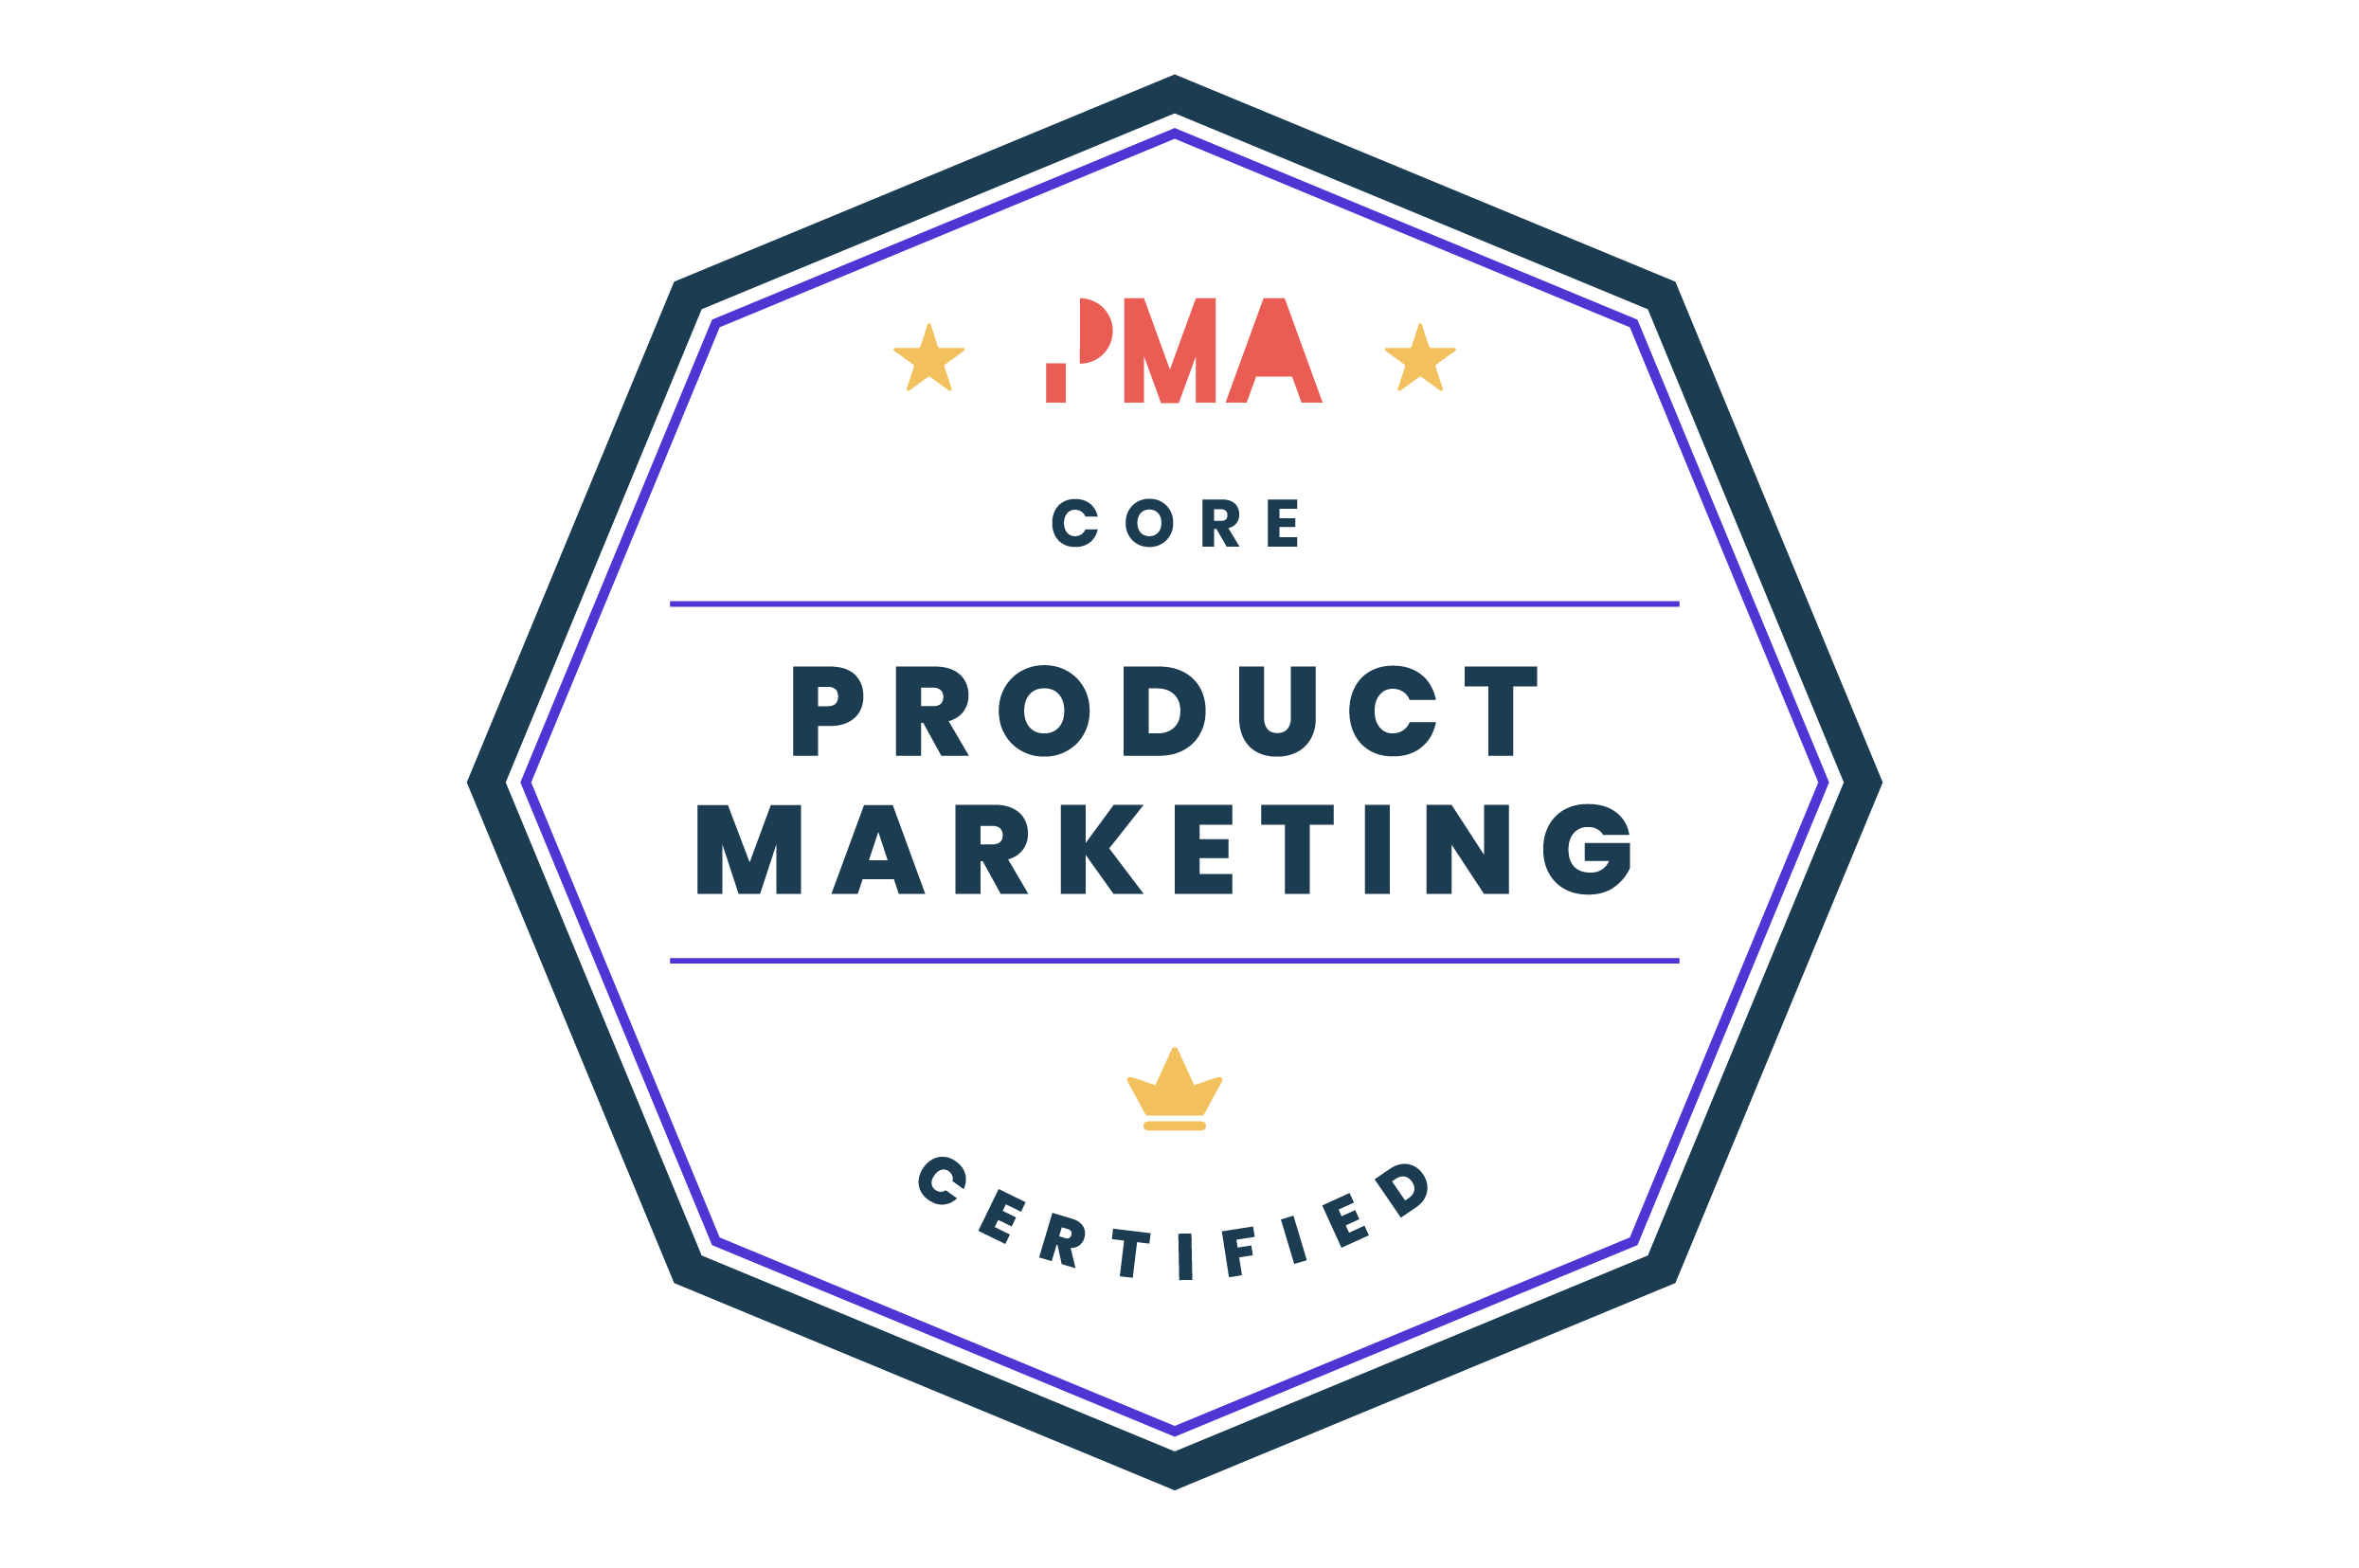 Product Marketing Certified: Core badge